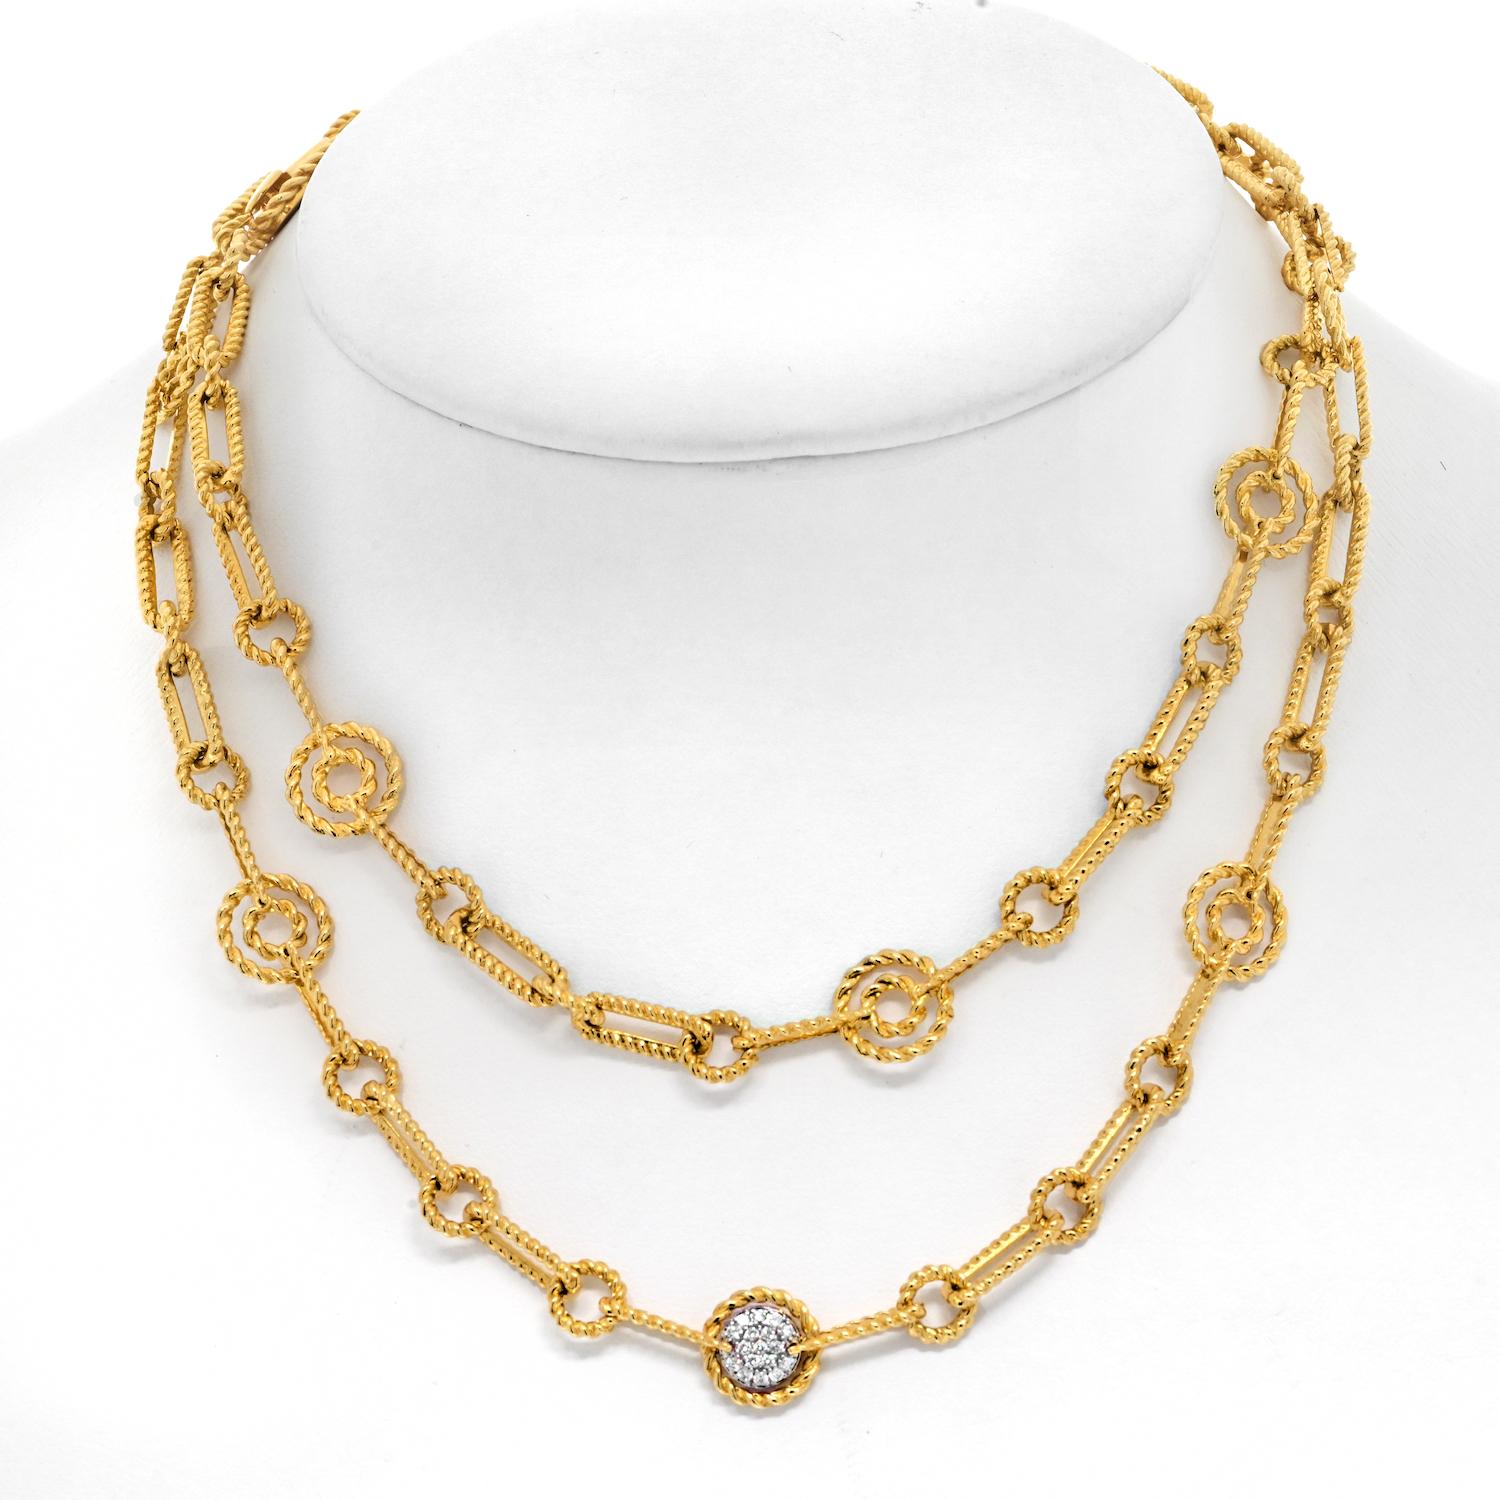 Indulge in the epitome of luxury with the Roberto Coin 30-Inch Twisted Rope Links 18K Gold Two-Tone Chain Necklace, a masterpiece that seamlessly blends craftsmanship, design, and sophistication. This exquisite necklace is a celebration of artistry,